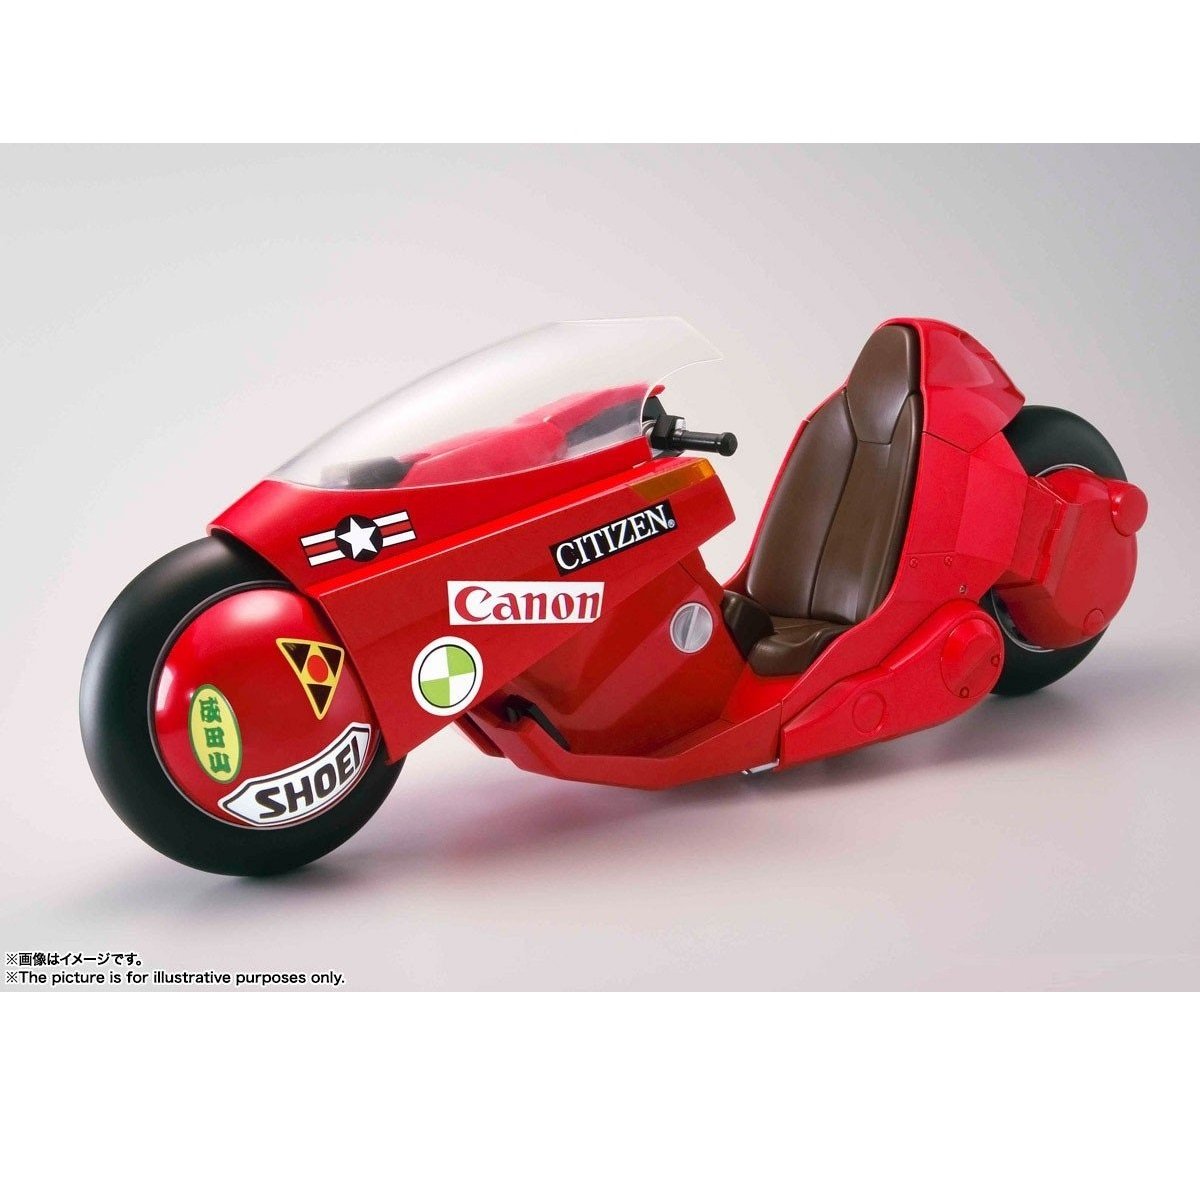 Project BM! Soul of Popinika Kaneda`s Bike (Revival Ver.)-Bandai-Ace Cards & Collectibles